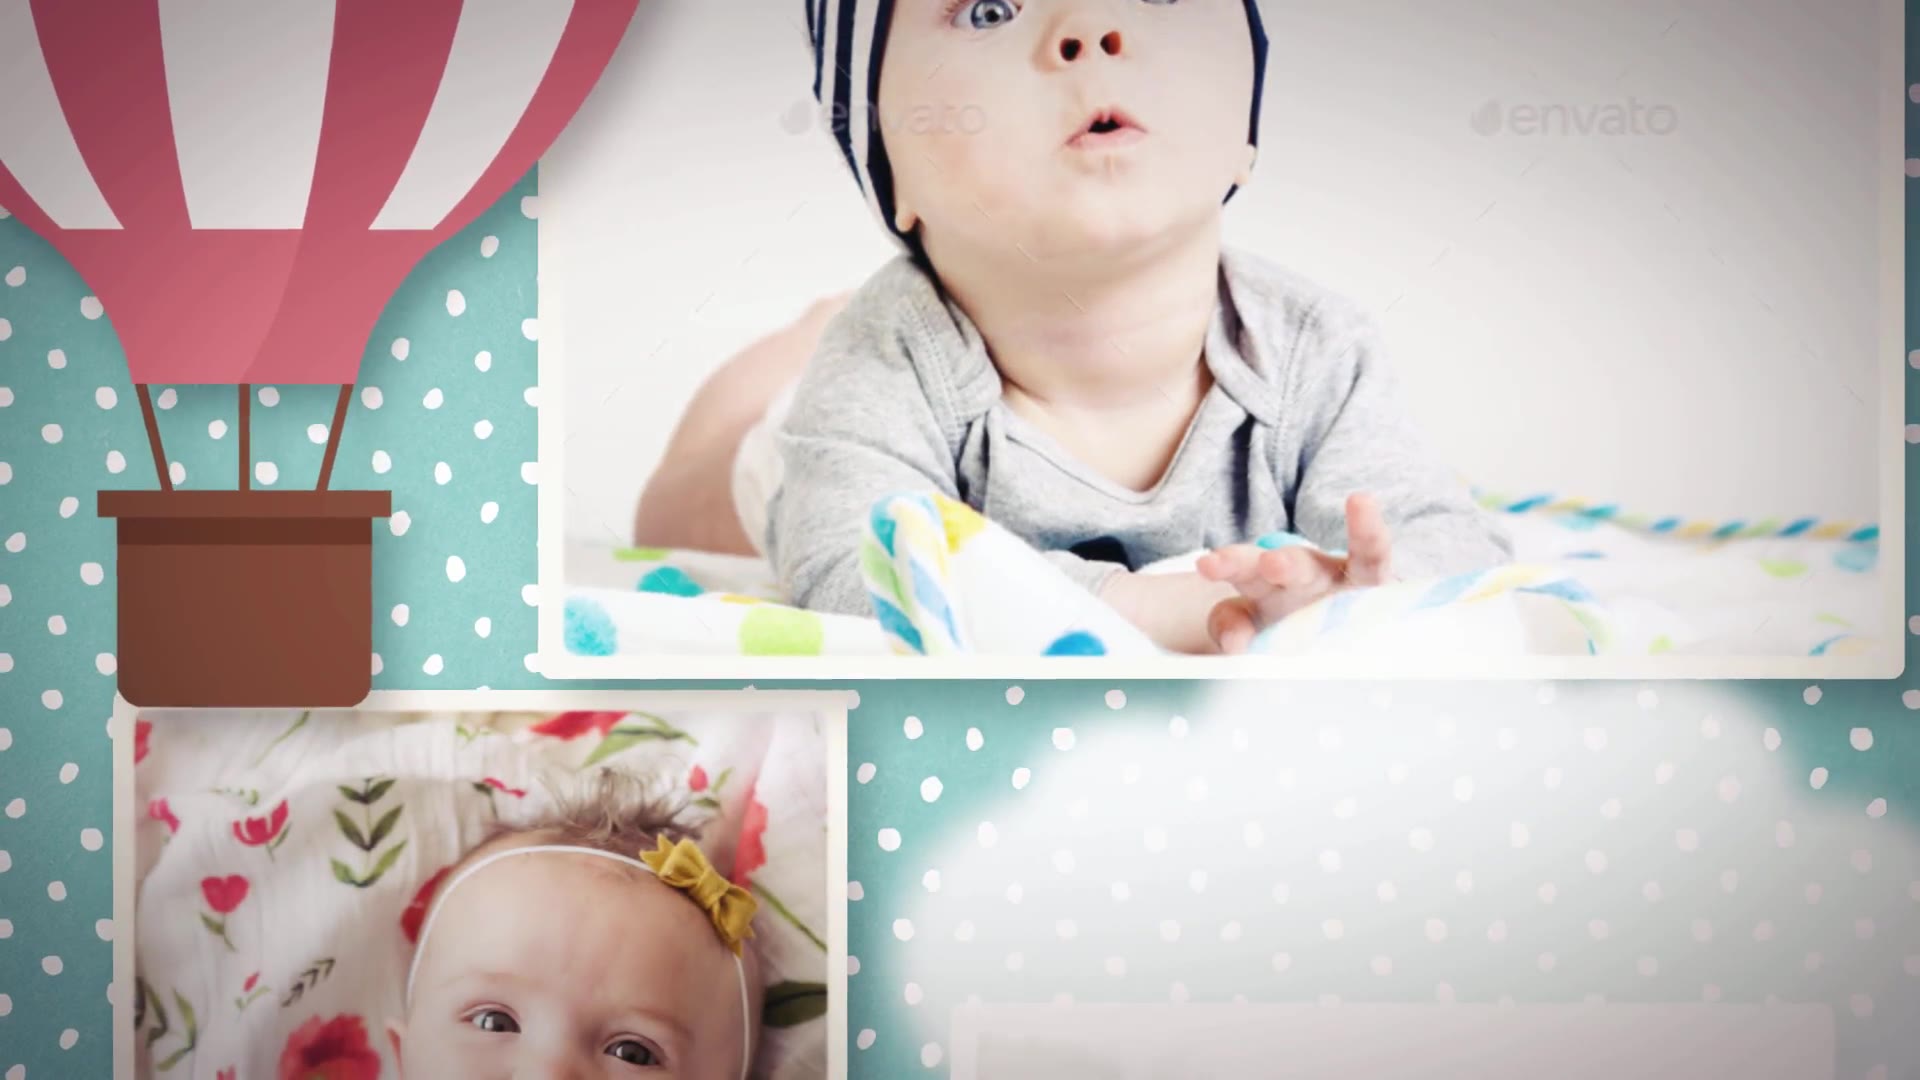 Kids Photo Album ~ After Effects Template #107618301